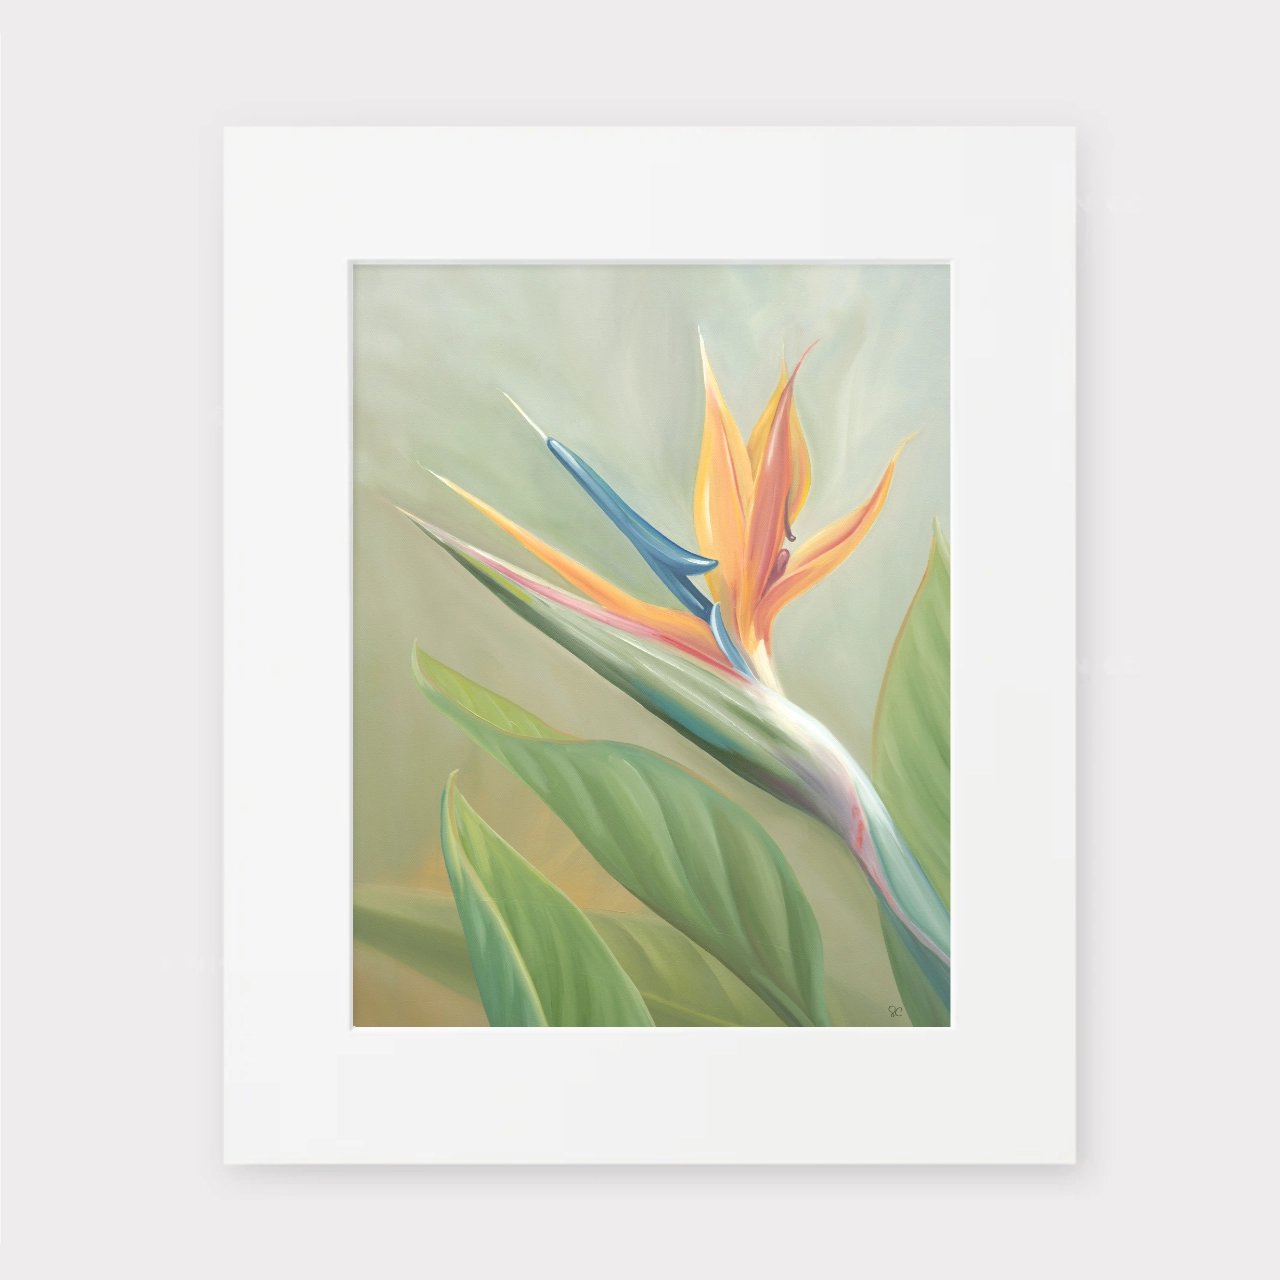 "Searching for Paradise" Matted Print